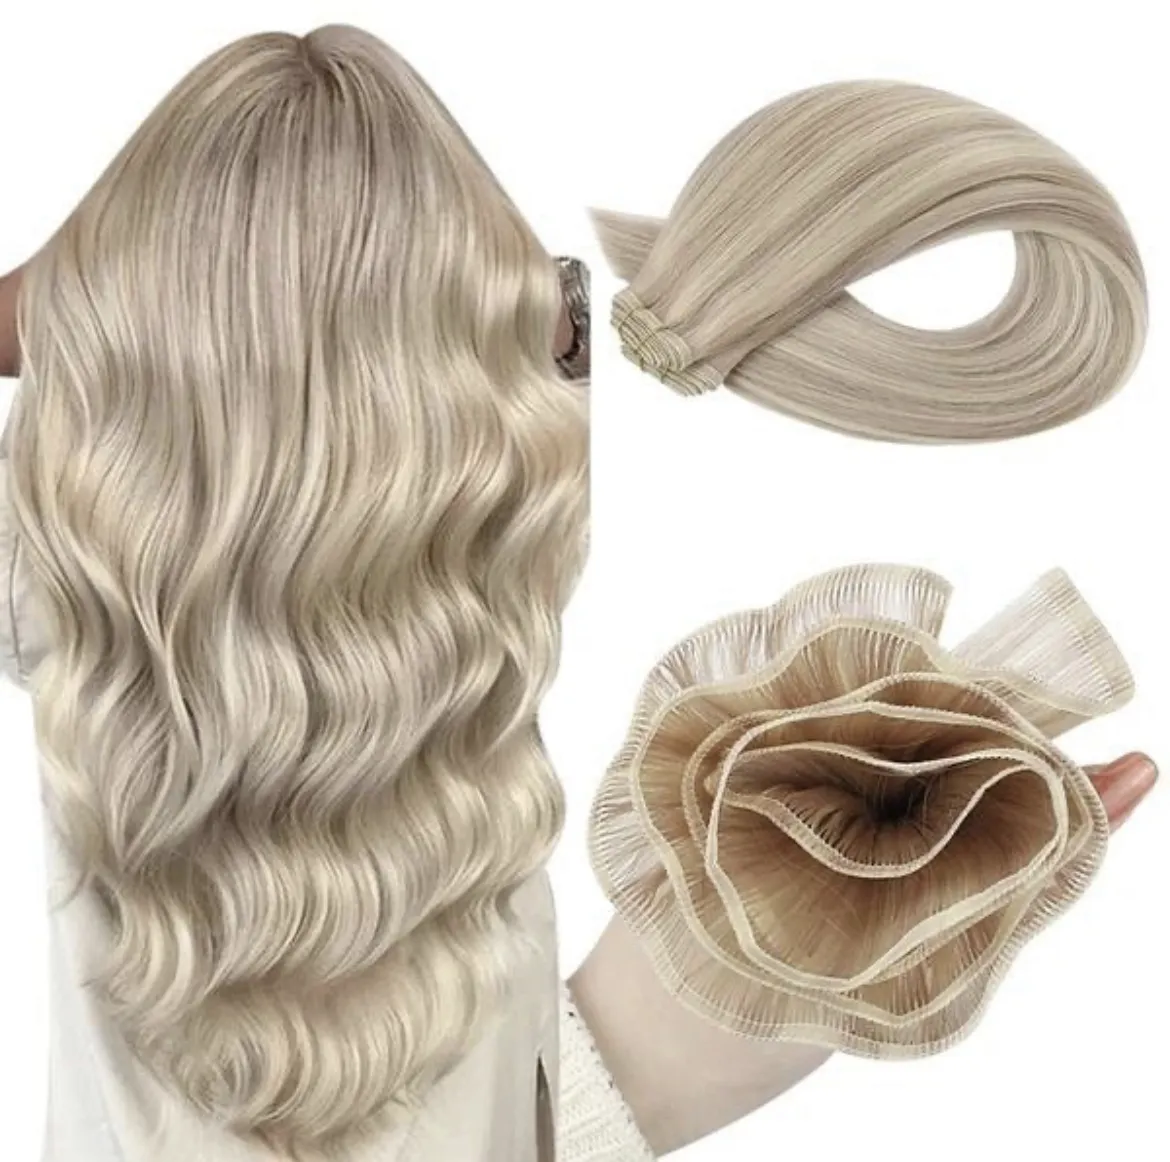 Top Quality Russian Slavic Raw Hair Cuticle Intact Thick Ends Double Drawn Remy Hair Extensions Whitest Color For Hand Tied Weft